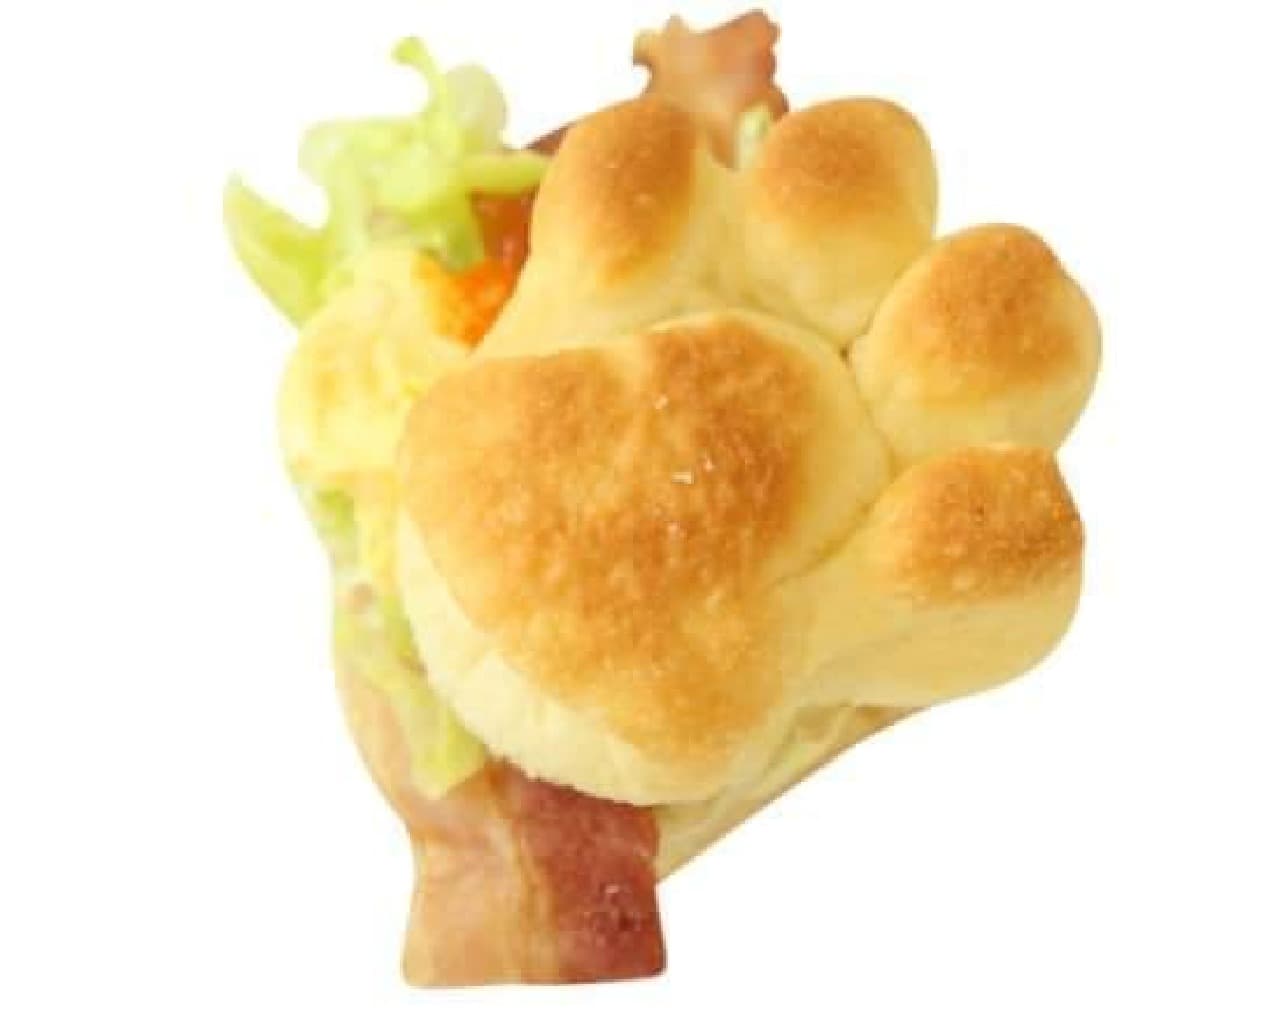 "Paw Paw Slider" is an original slider (Minburger) containing cute paw-shaped bacon, lettuce, and eggs.